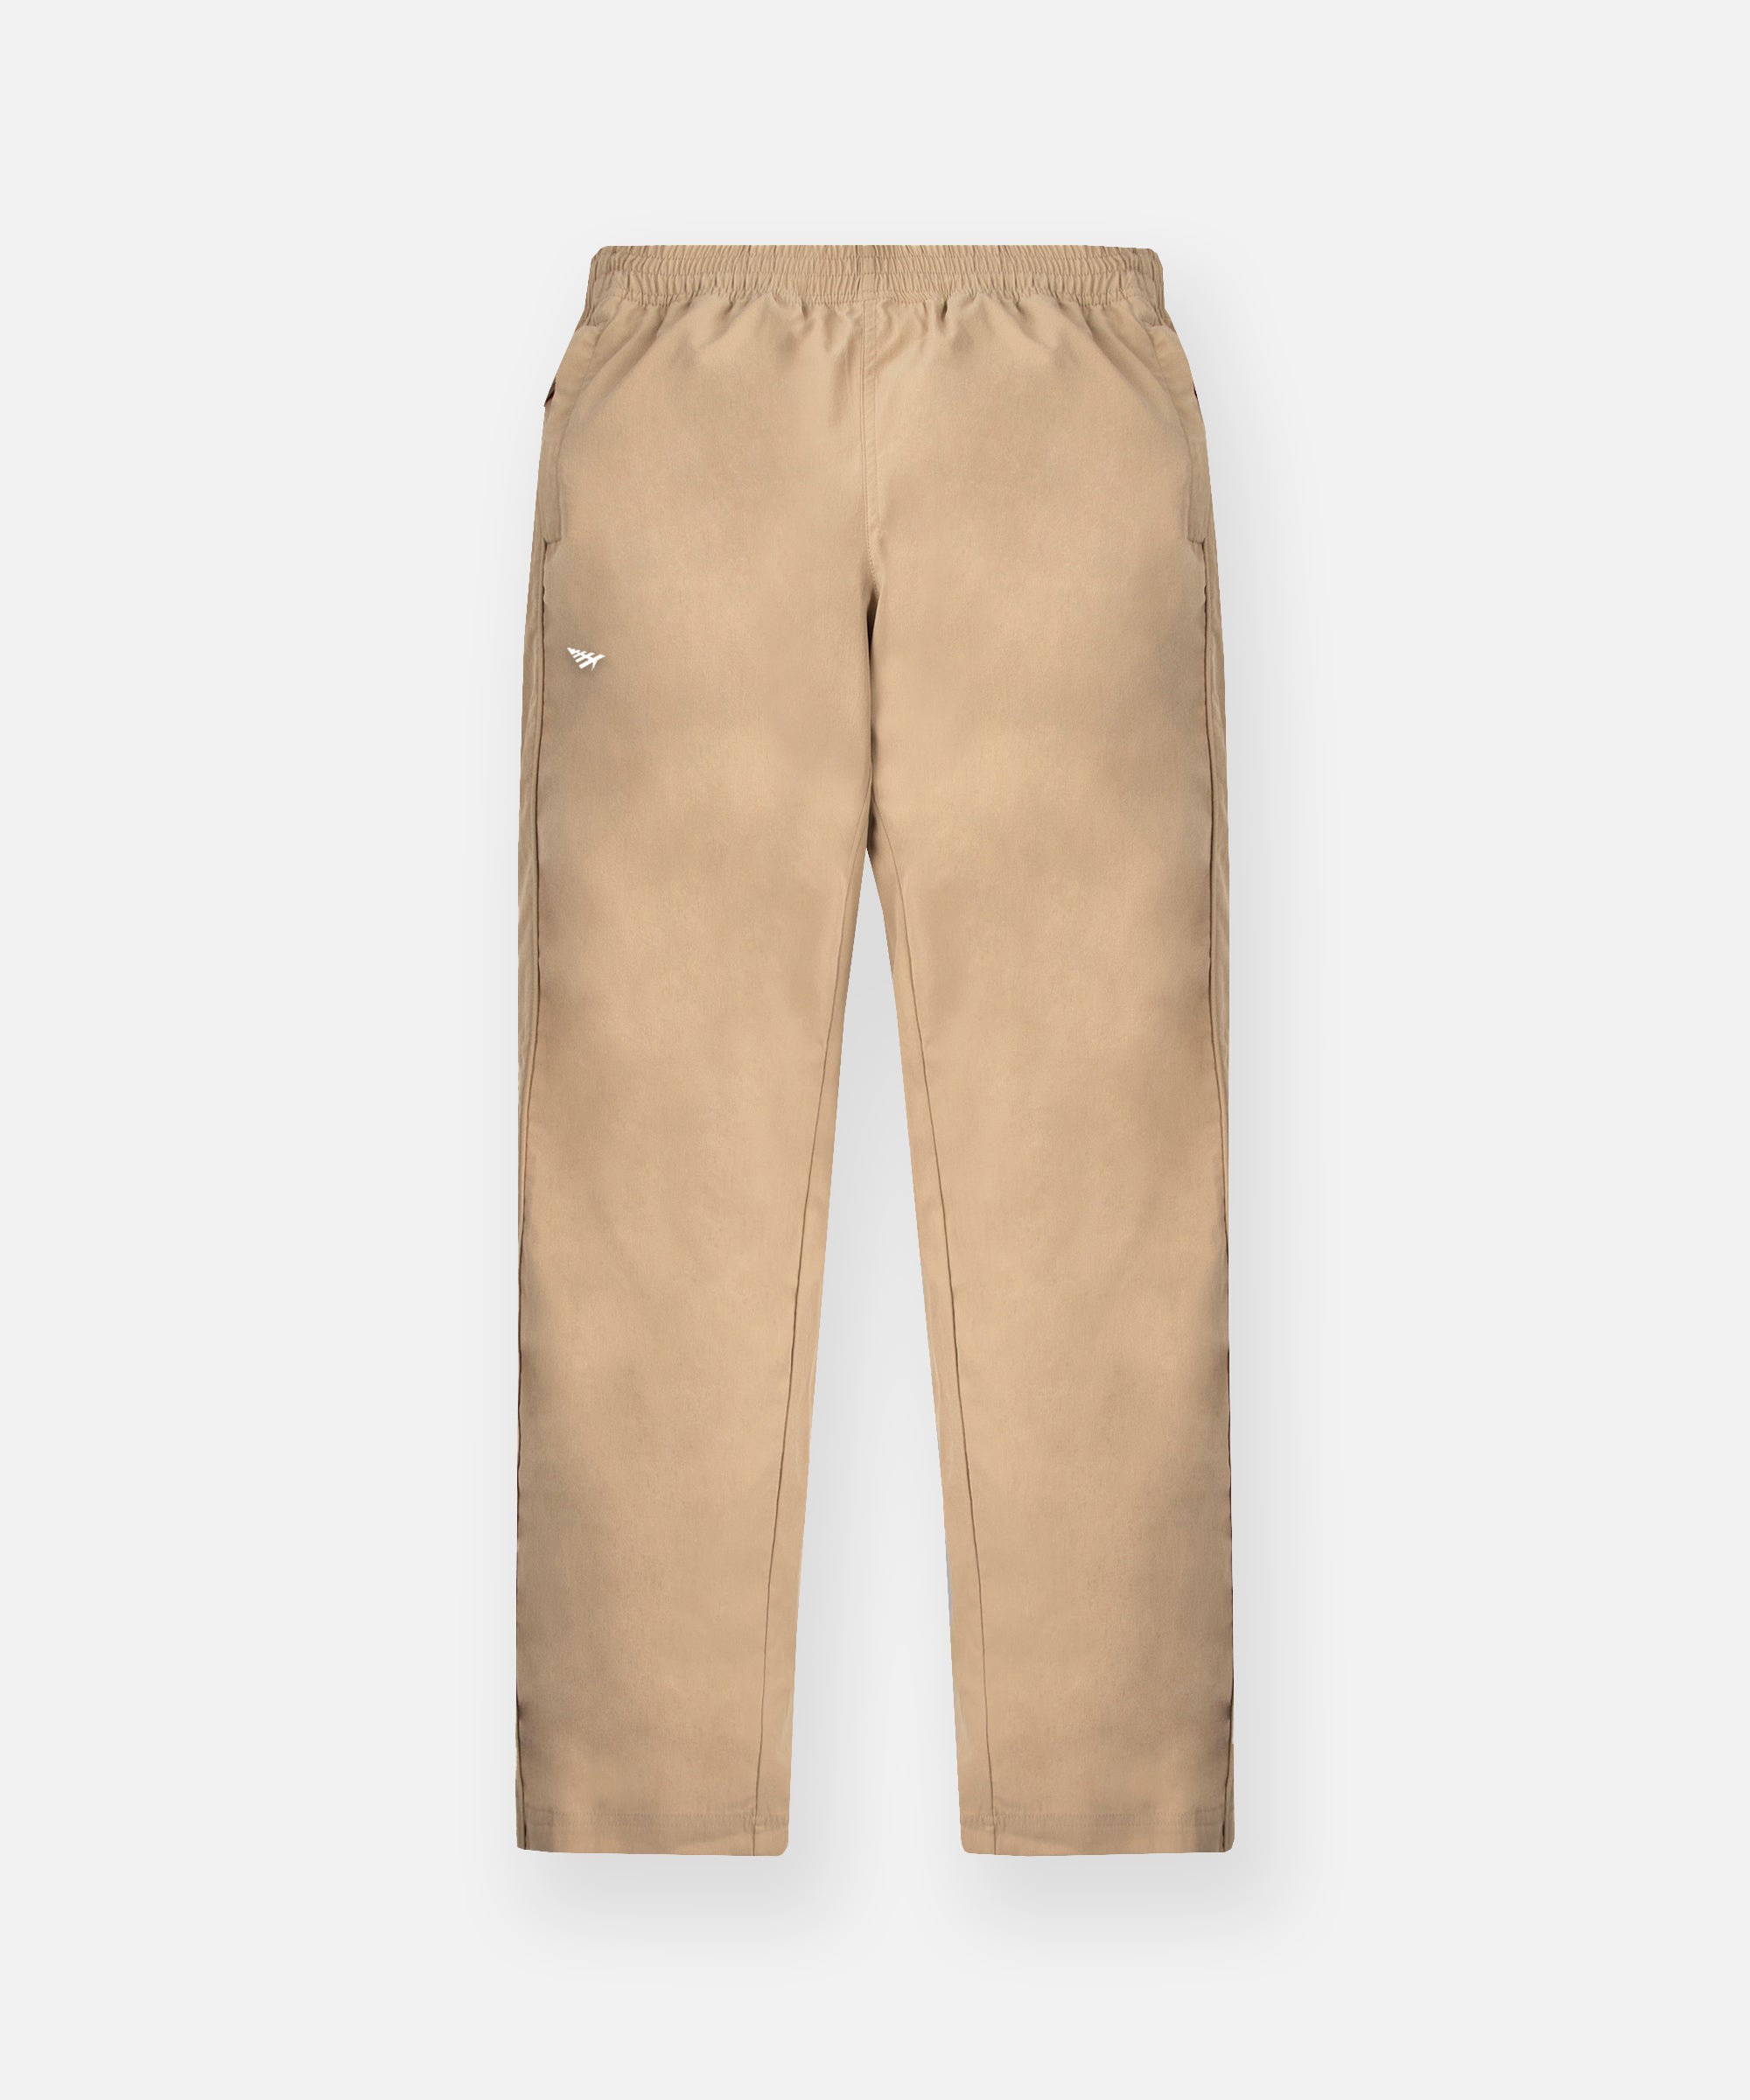 Cotton On Men's Cargo Loose Fit Track Pants | CoolSprings Galleria